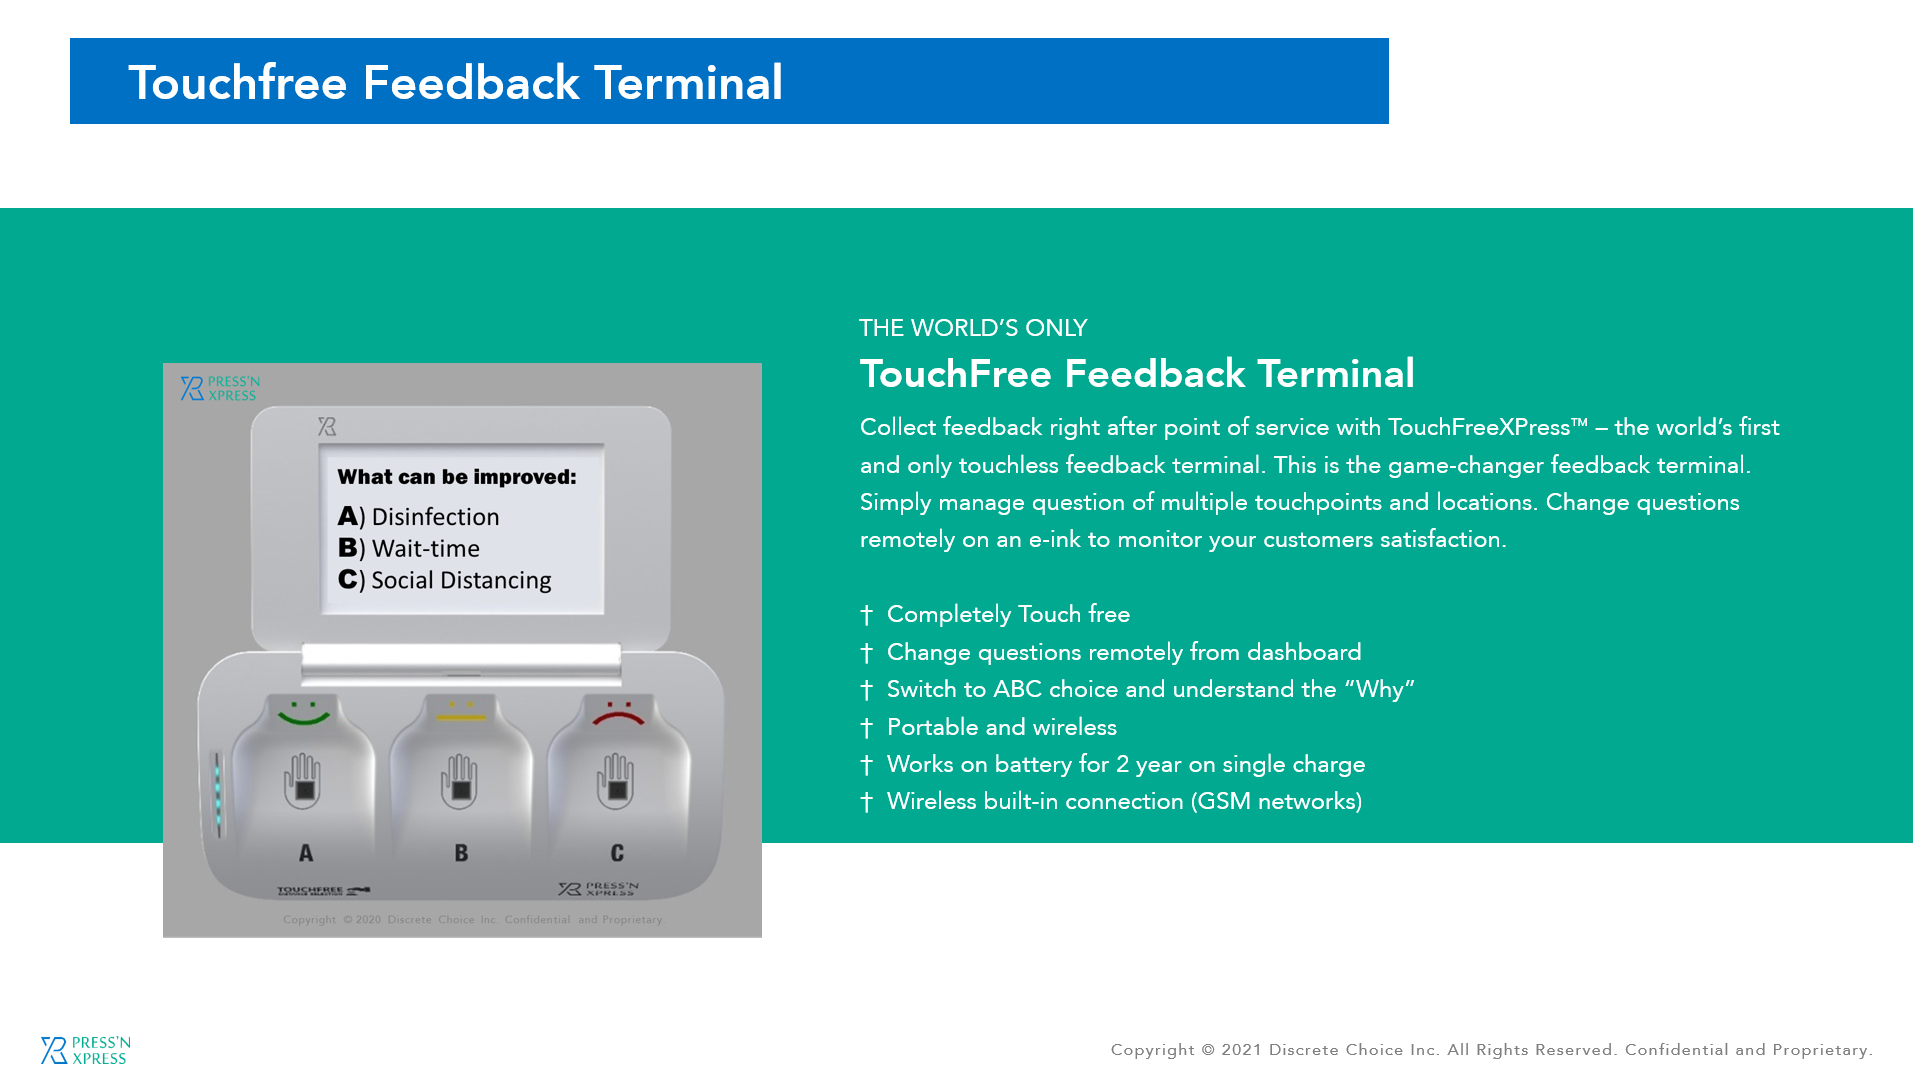 Touchless Feedback Kiosk - collect feedback at in person locations in real-time. Manage the questions remotely from cloud based dashboard. Ask quantitative and qualitative question to get better insights on customer and employee experience.